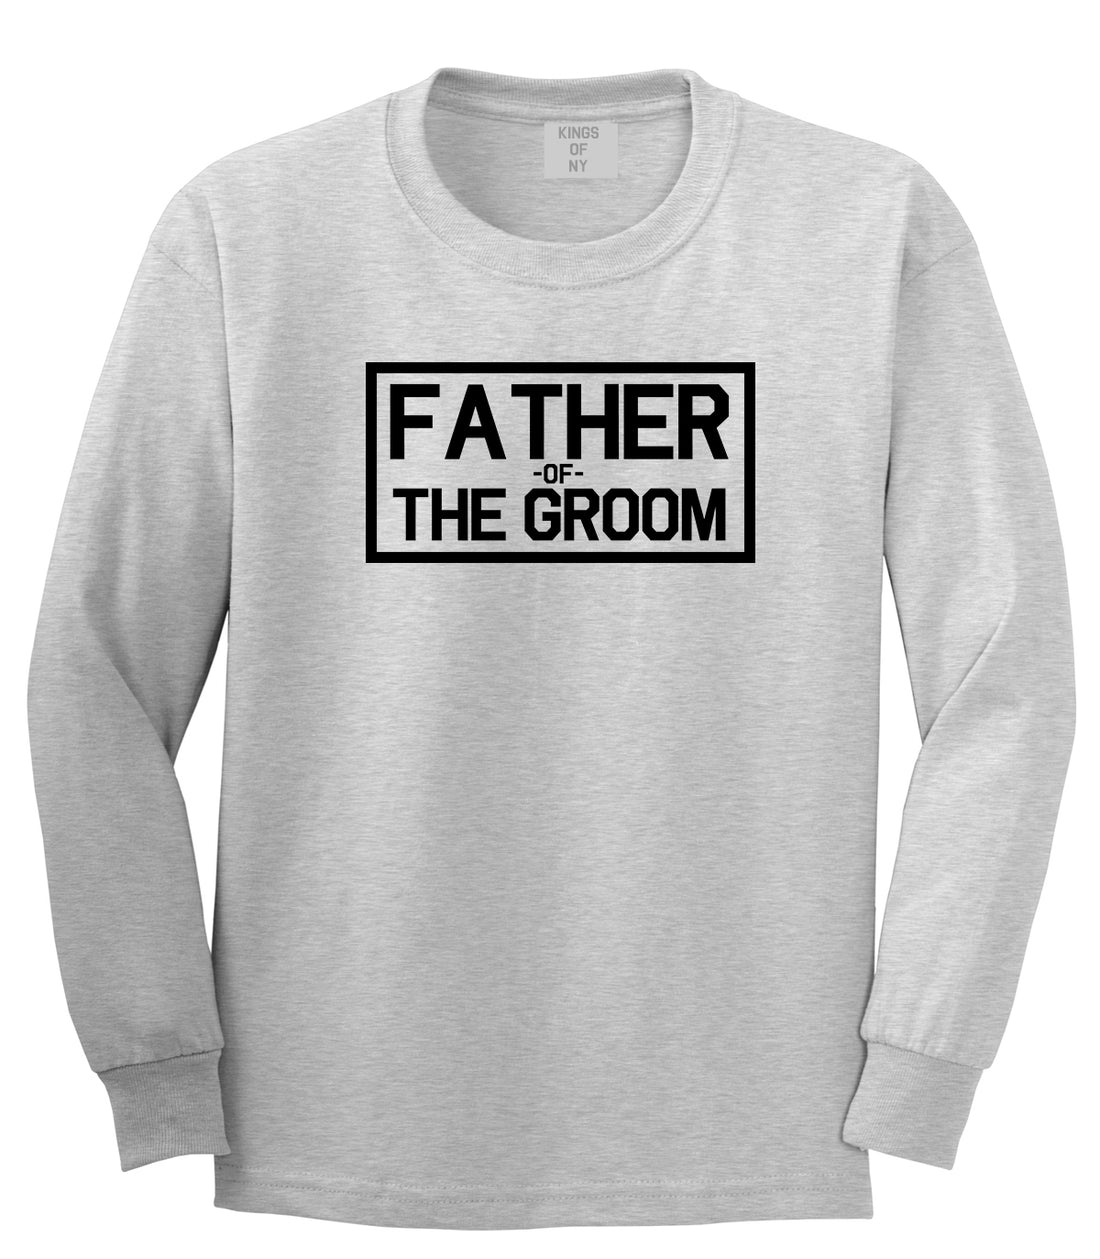 Father Of The Groom Mens Grey Long Sleeve T-Shirt by Kings Of NY